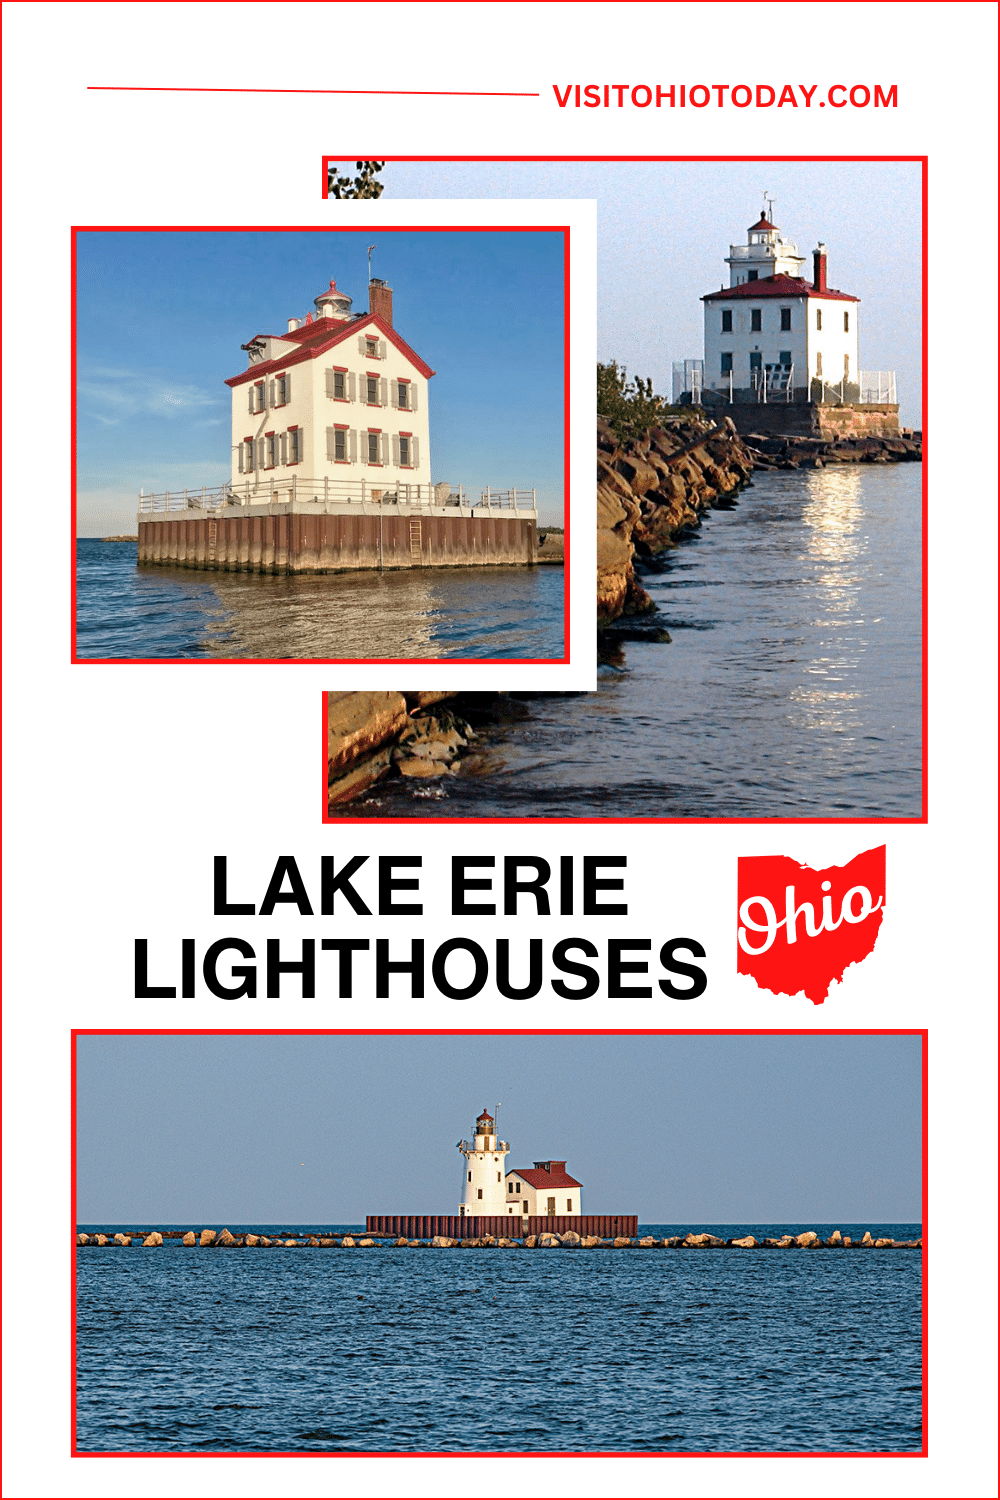 vertical image with three photos of lighthouses: Fairport Harbor West Breakwater, Lorain Lighthouse, and West Pierhead Lighthouse. Text in the middle: Lake Erie Lighthouses Ohio